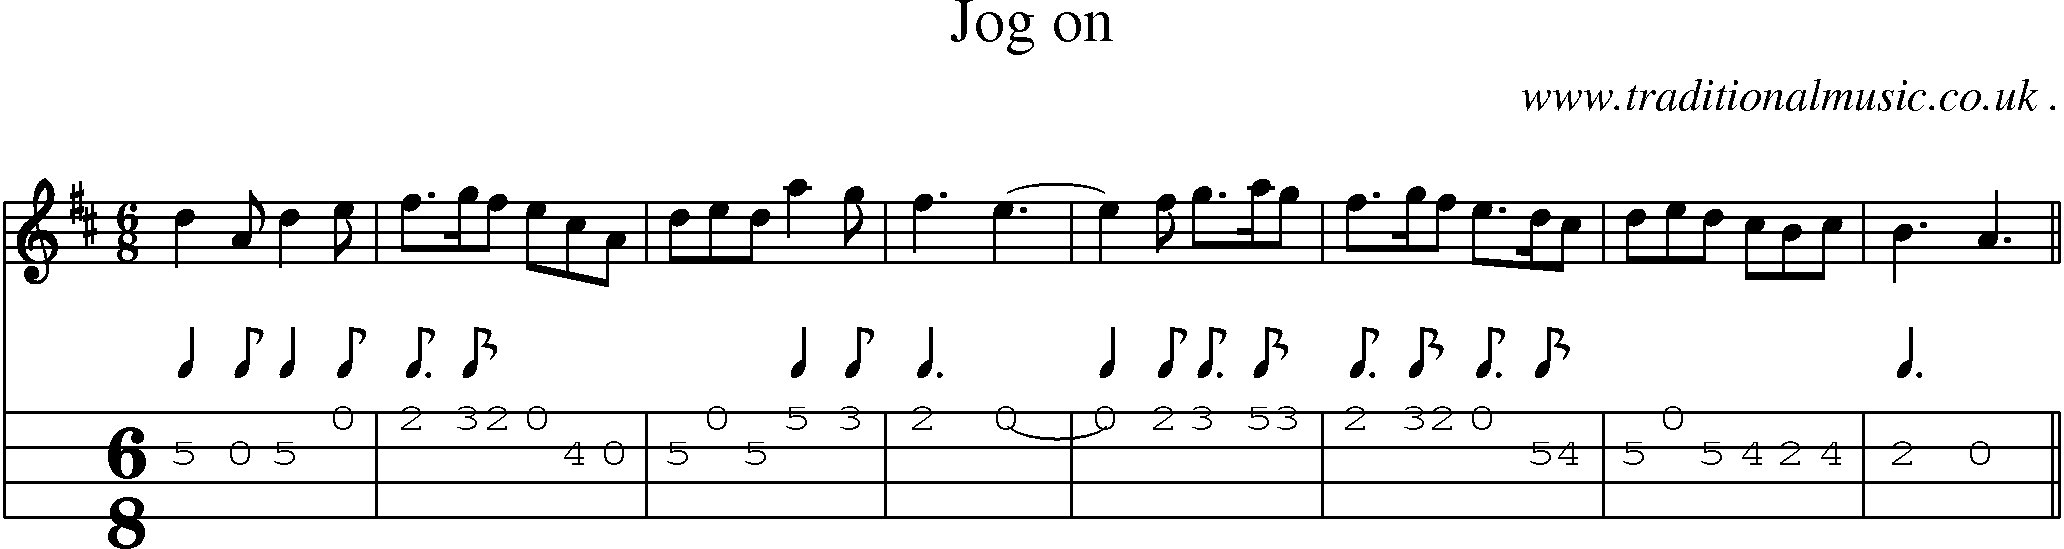 Sheet-music  score, Chords and Mandolin Tabs for Jog On